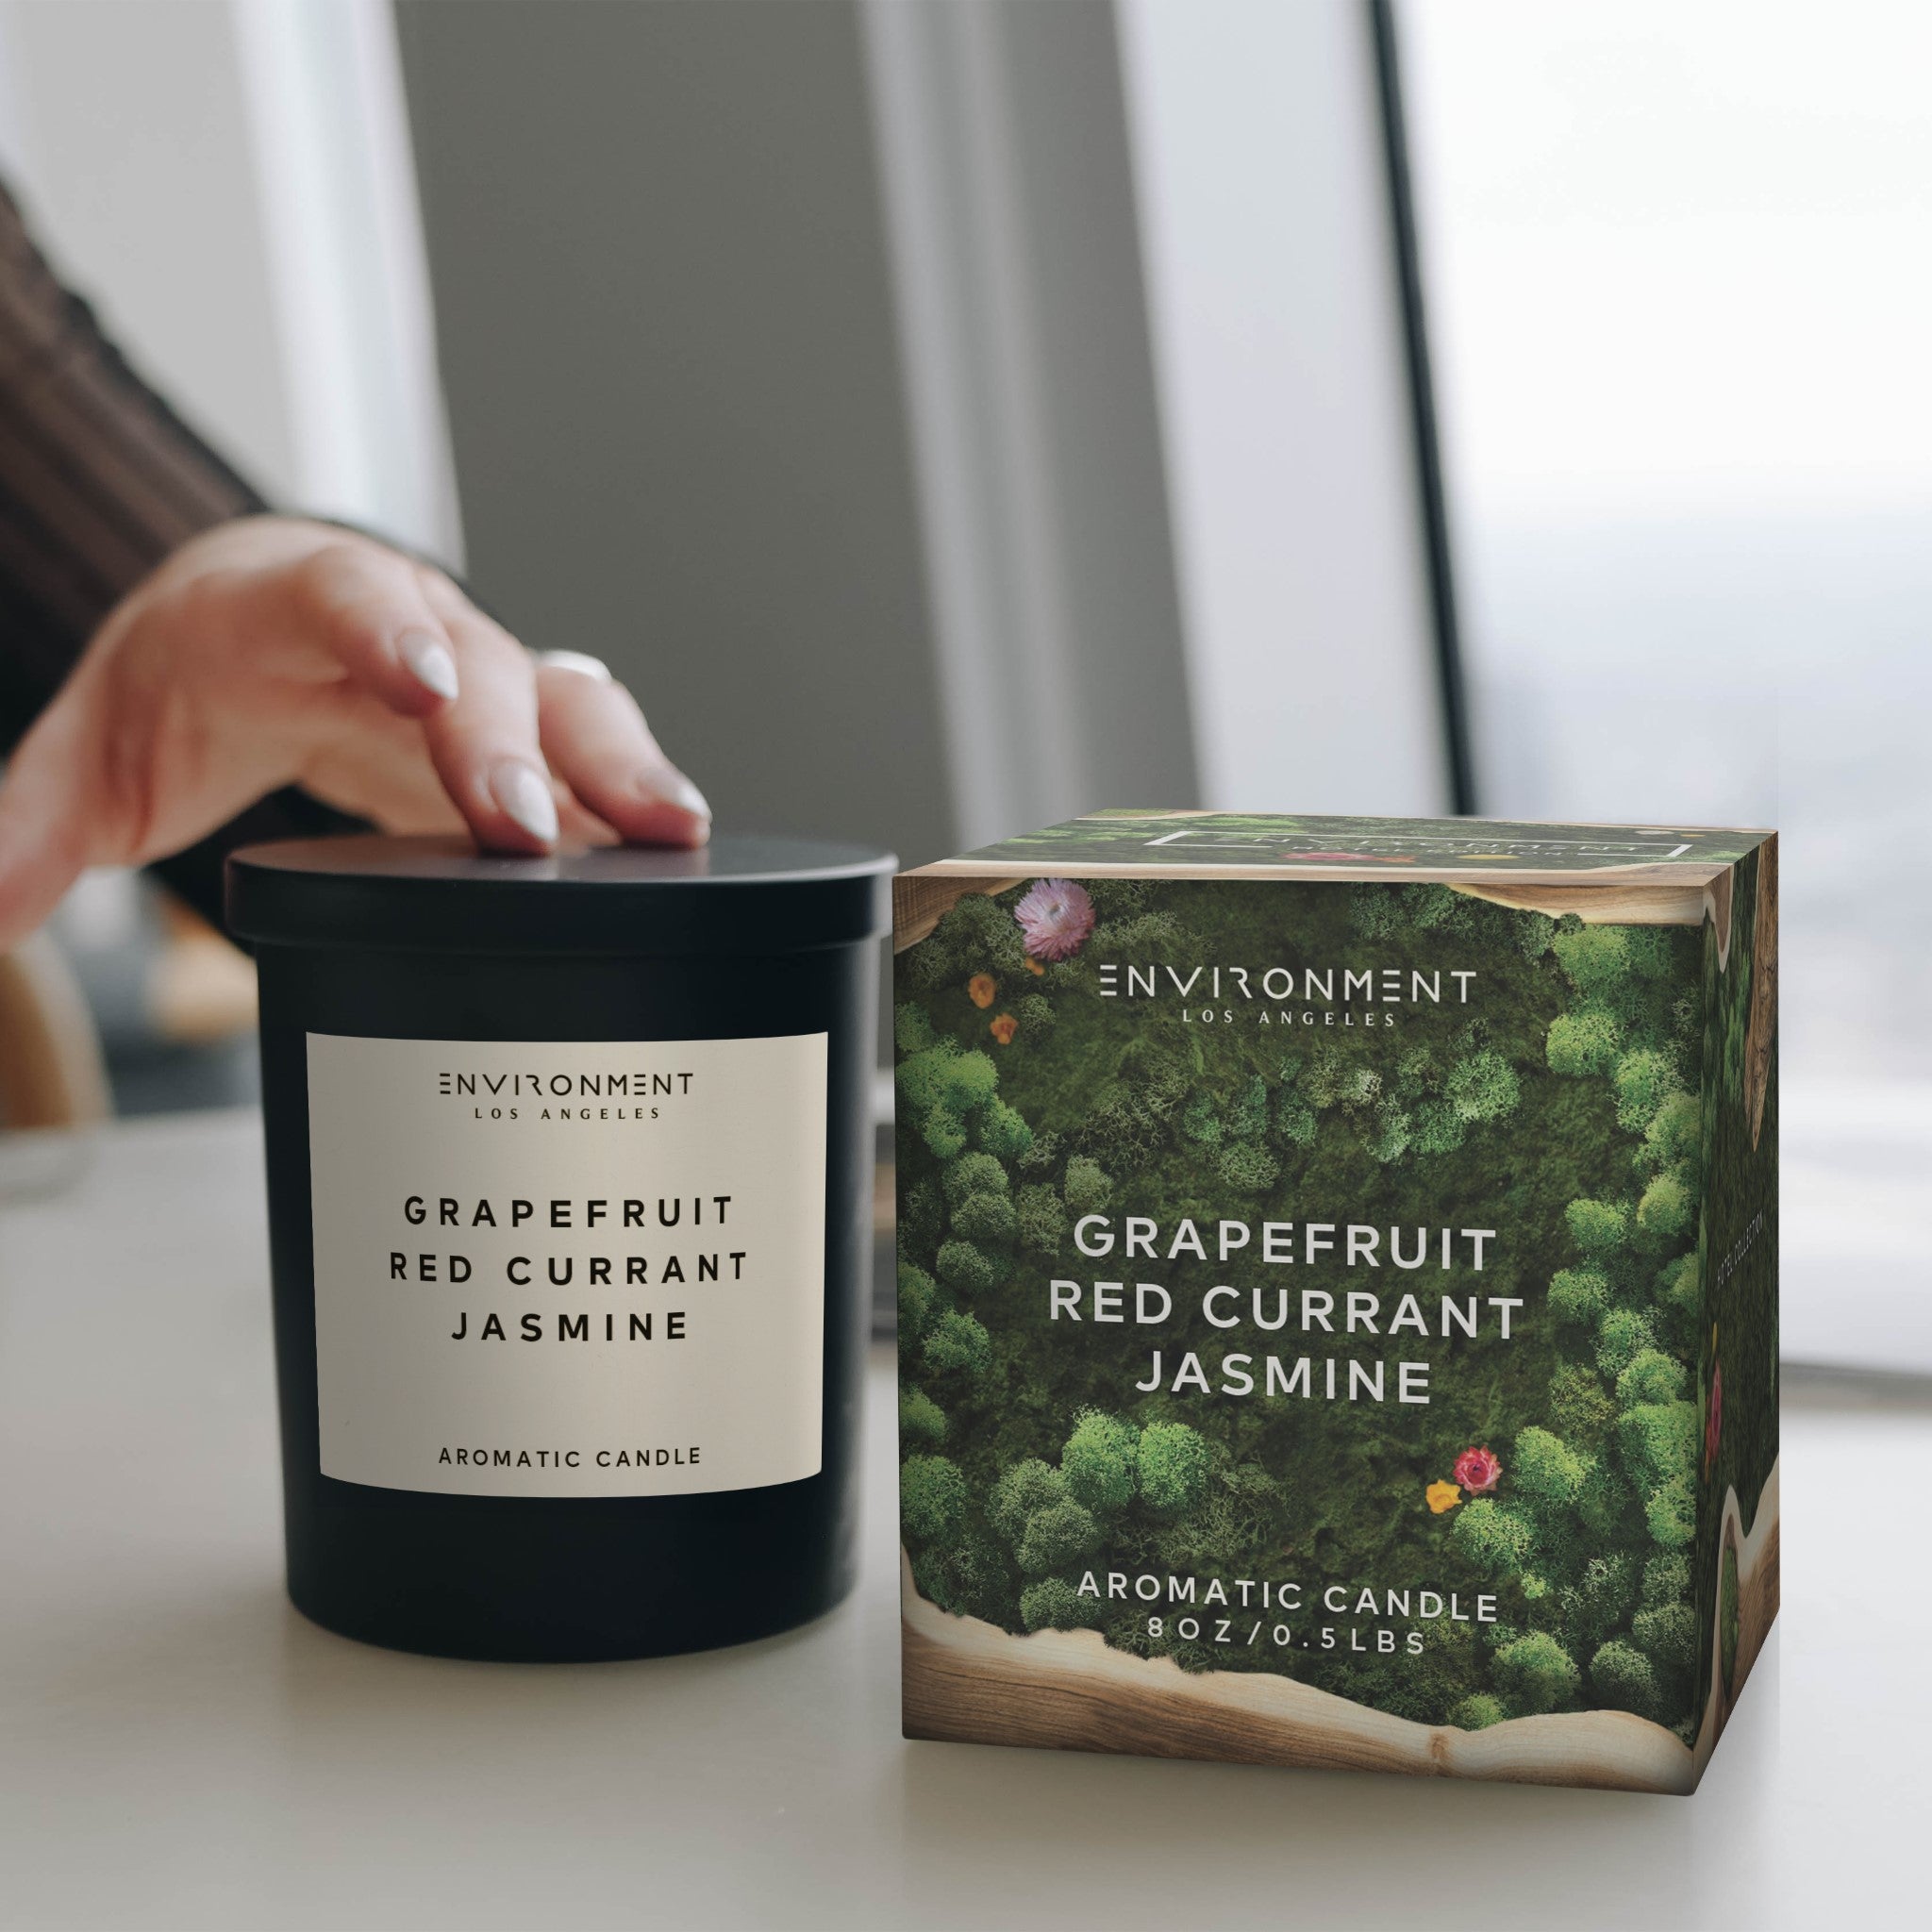 8oz Grapefruit | Red Currant | Jasmine Candle with Lid and Box (Inspired by Marriott Hotel®)